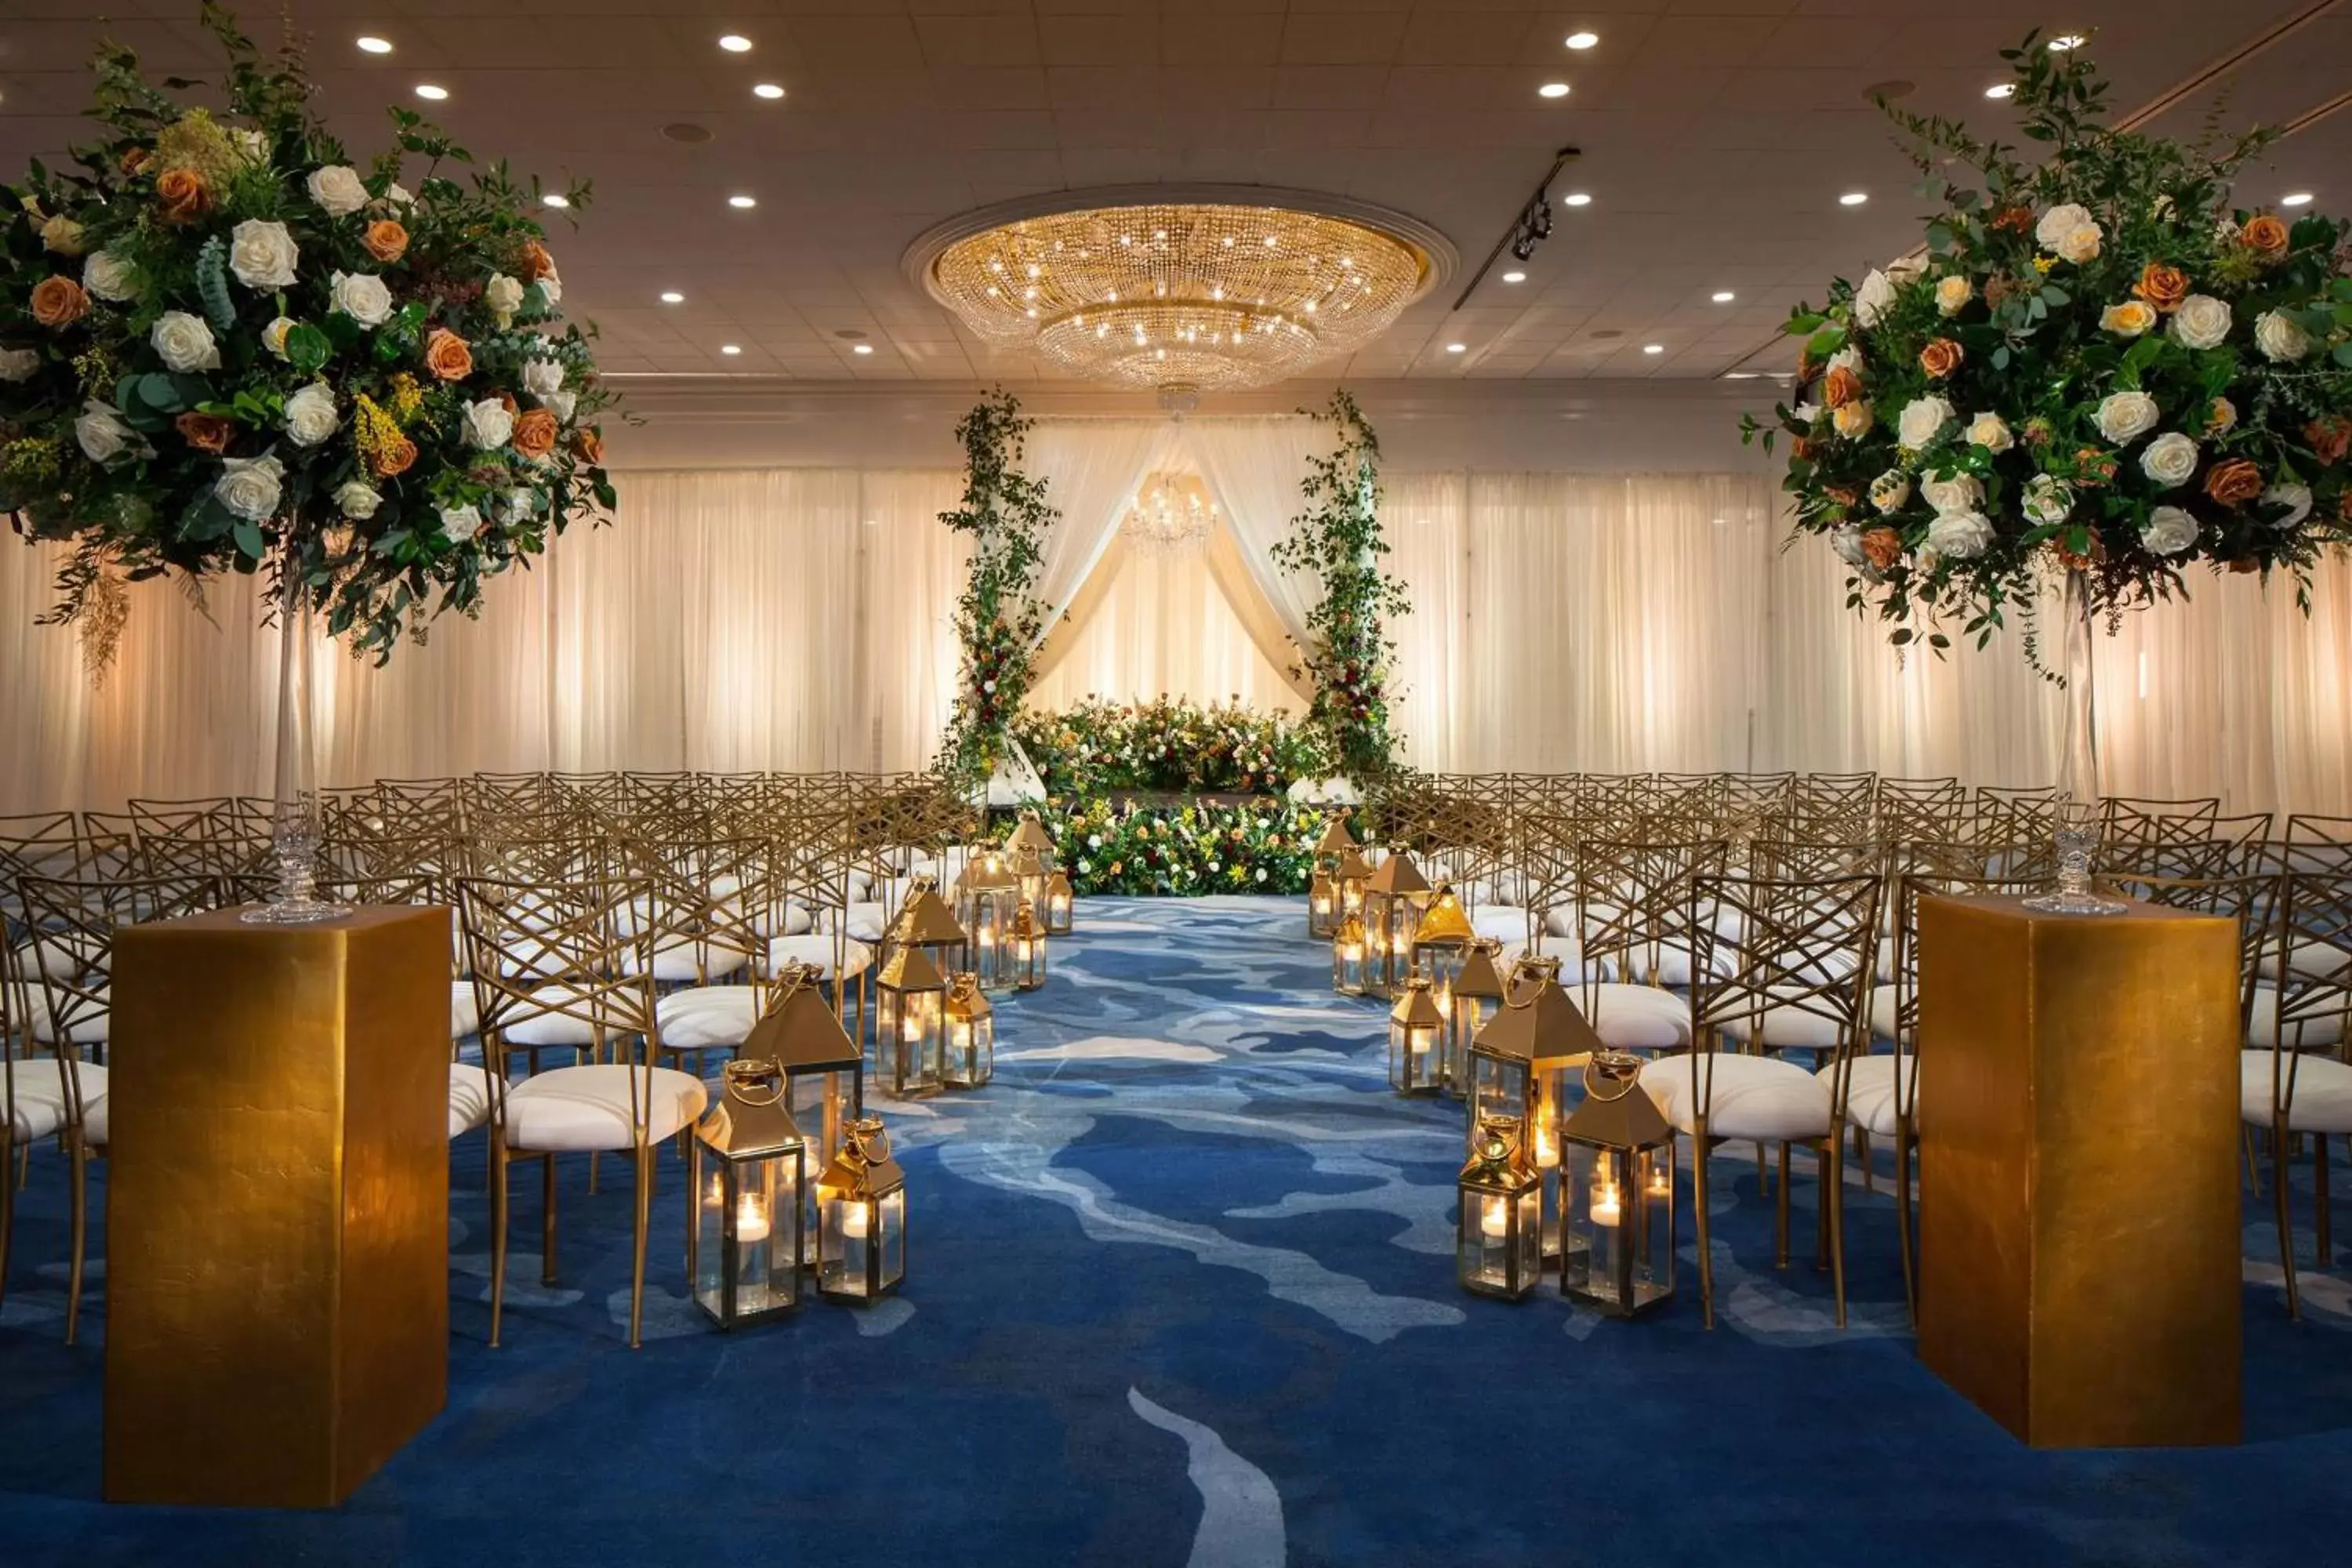 Banquet/Function facilities, Banquet Facilities in The Westin Oaks Houston at the Galleria